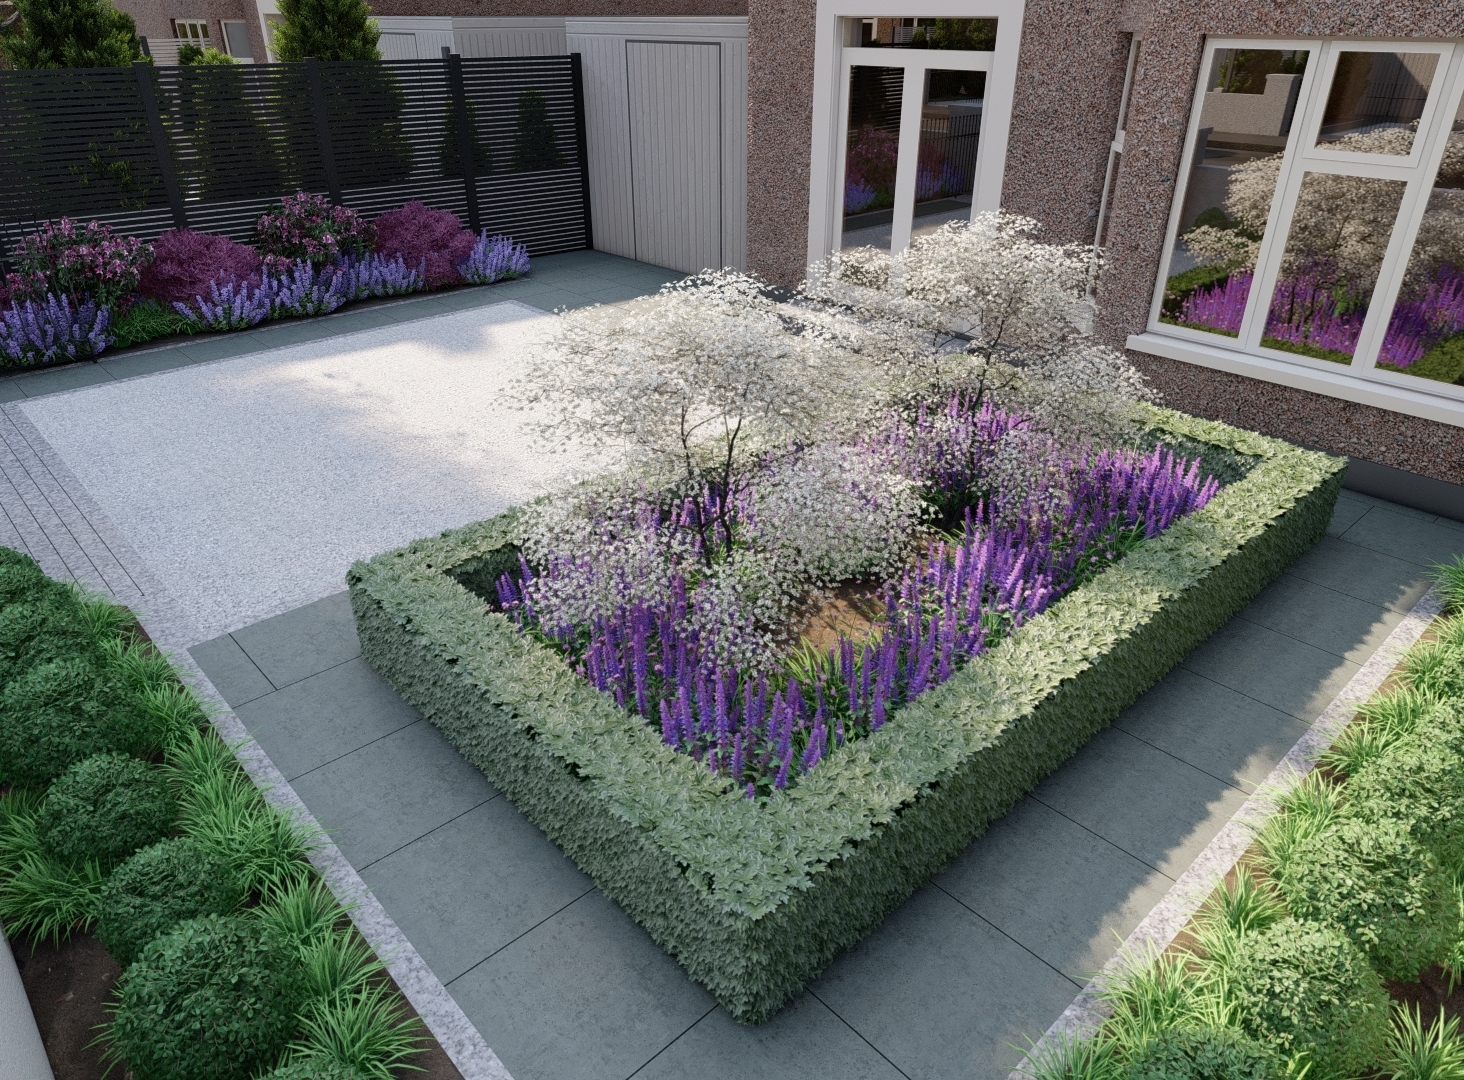 3D Design Visual illustrating a feature bed planted with clipped Buxus hedging, a central feature tree and mixed herbaceous flowering plants | Owen Chubb Garden Design, Tel 087-2306128